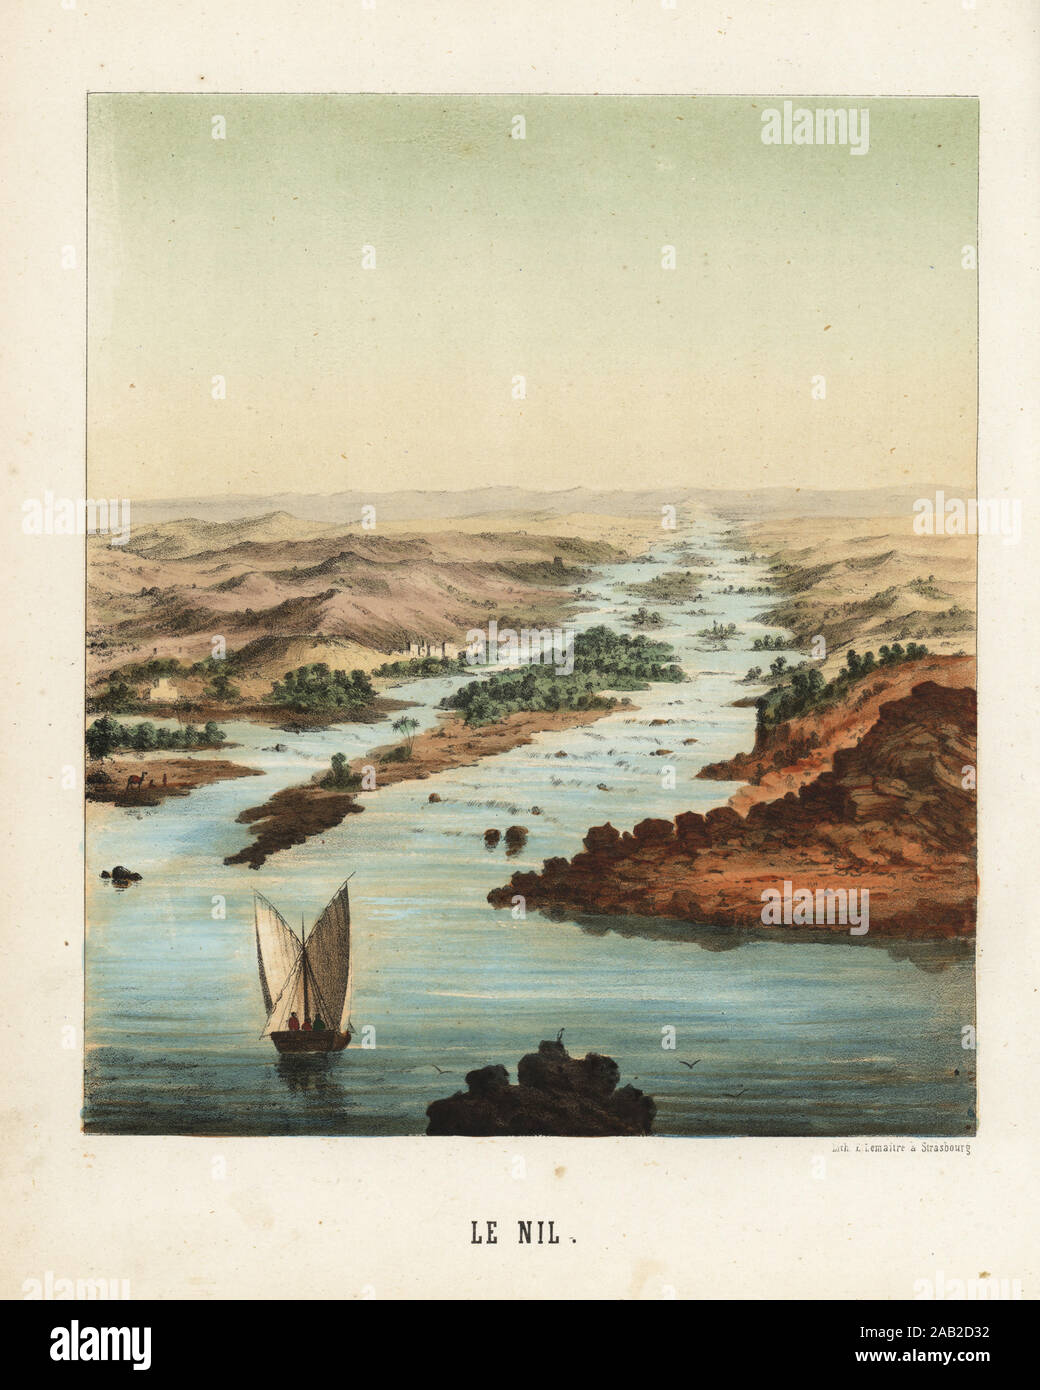 View of the Nile River, Egypt, 19th century. A dhow sailing vessel in the foreground. Le Nil. Handcolored lithograph by Emile Lemaitre from Munerelle’s Les Phenomenes et Curiosites de la Nature (Natural Phenomena and Curiosities), Libraire Derivaux, Strasbourg, 1856. Stock Photo